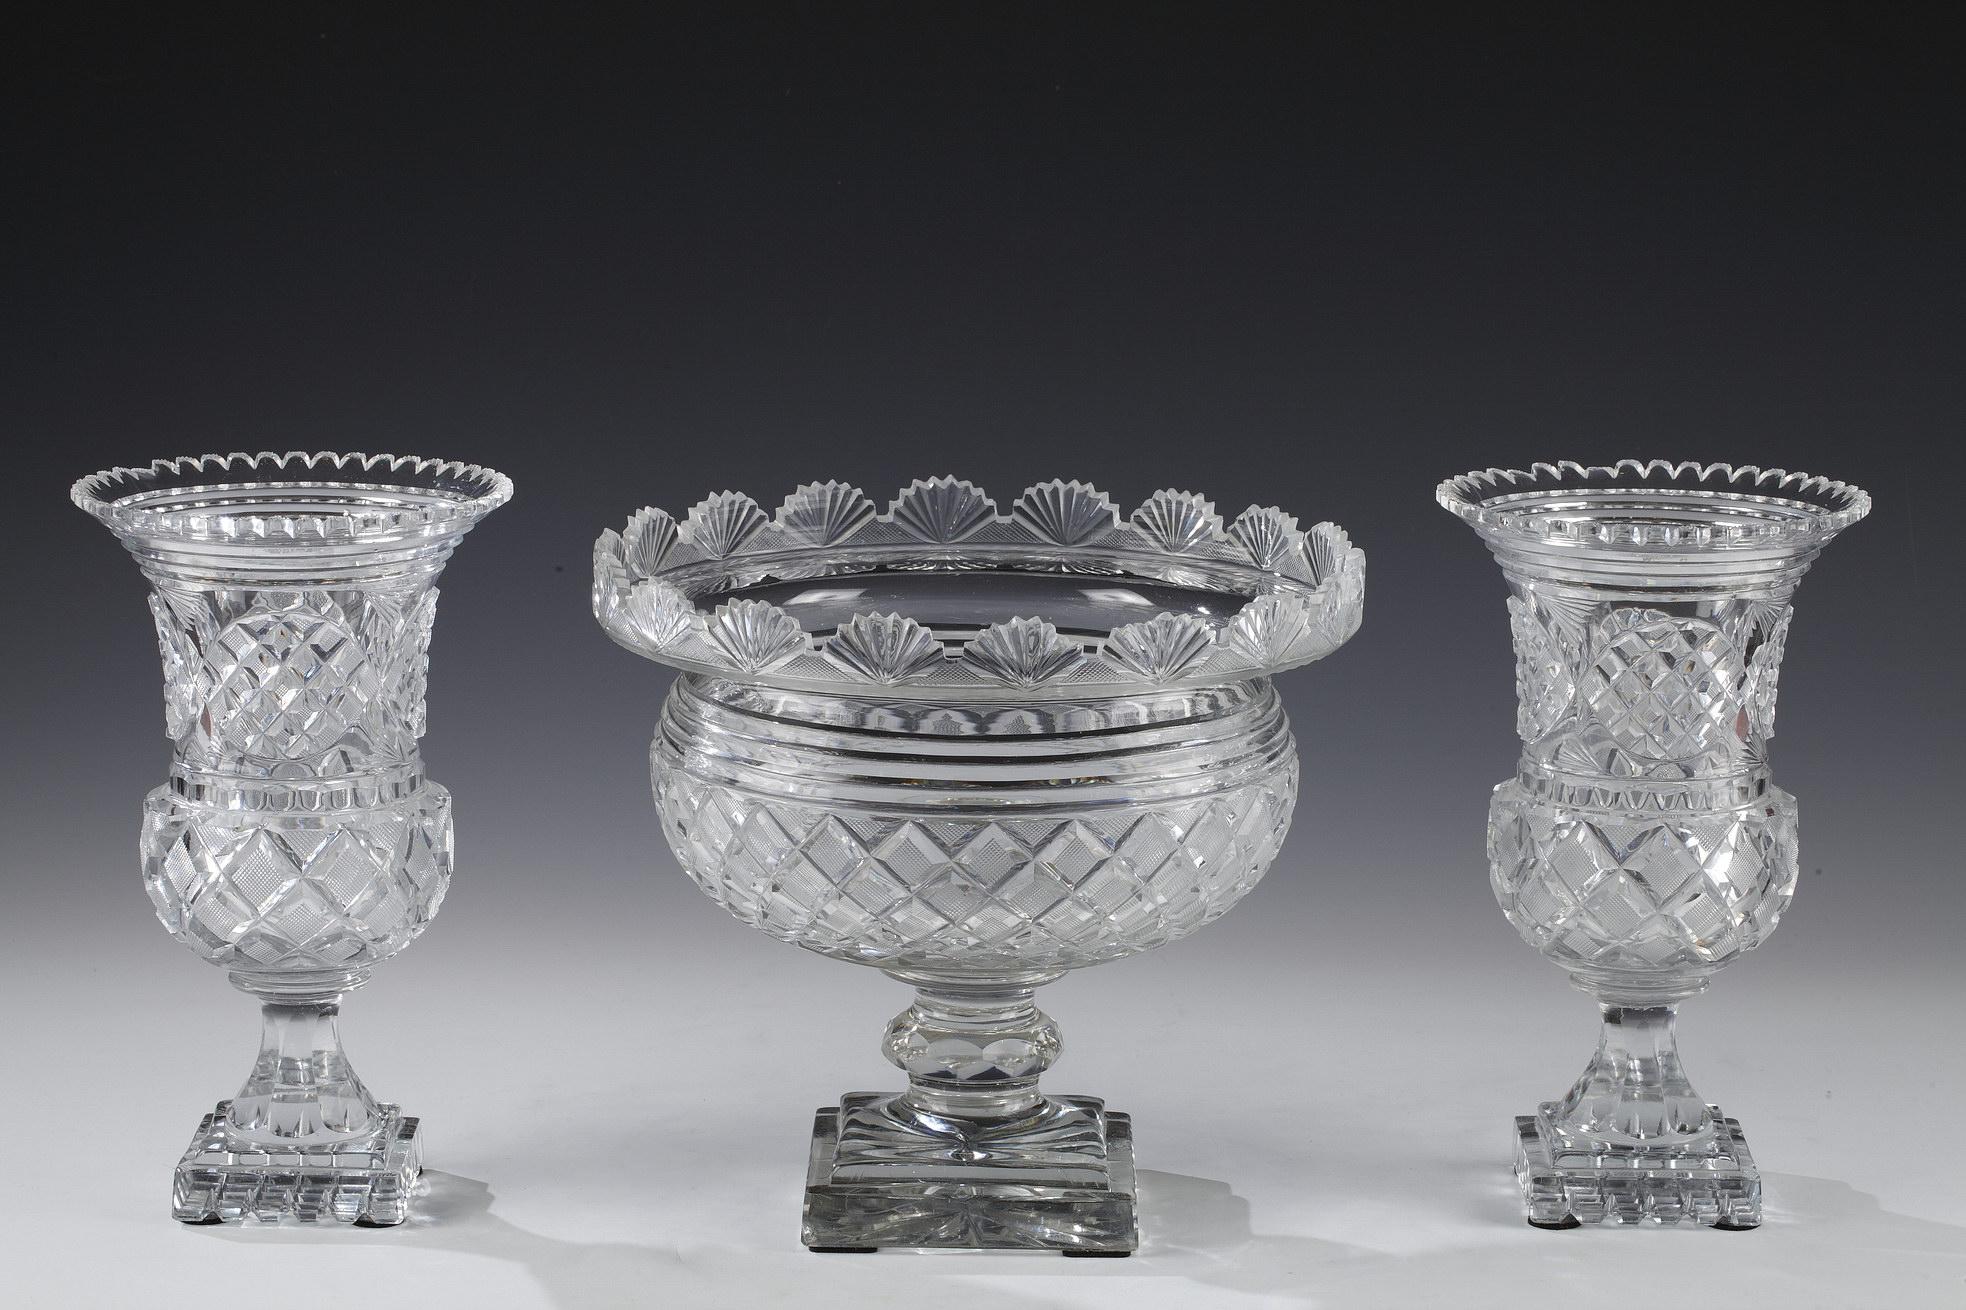 Elegant cut crystal set, composed of a circular goblet on pedestal and two Medici vases.
The whole is engraved with braces, and serrated edges on the flared neck. They rest on a square base.

Measures: Center height 25 cm (9.8 in.), diameter 27 cm